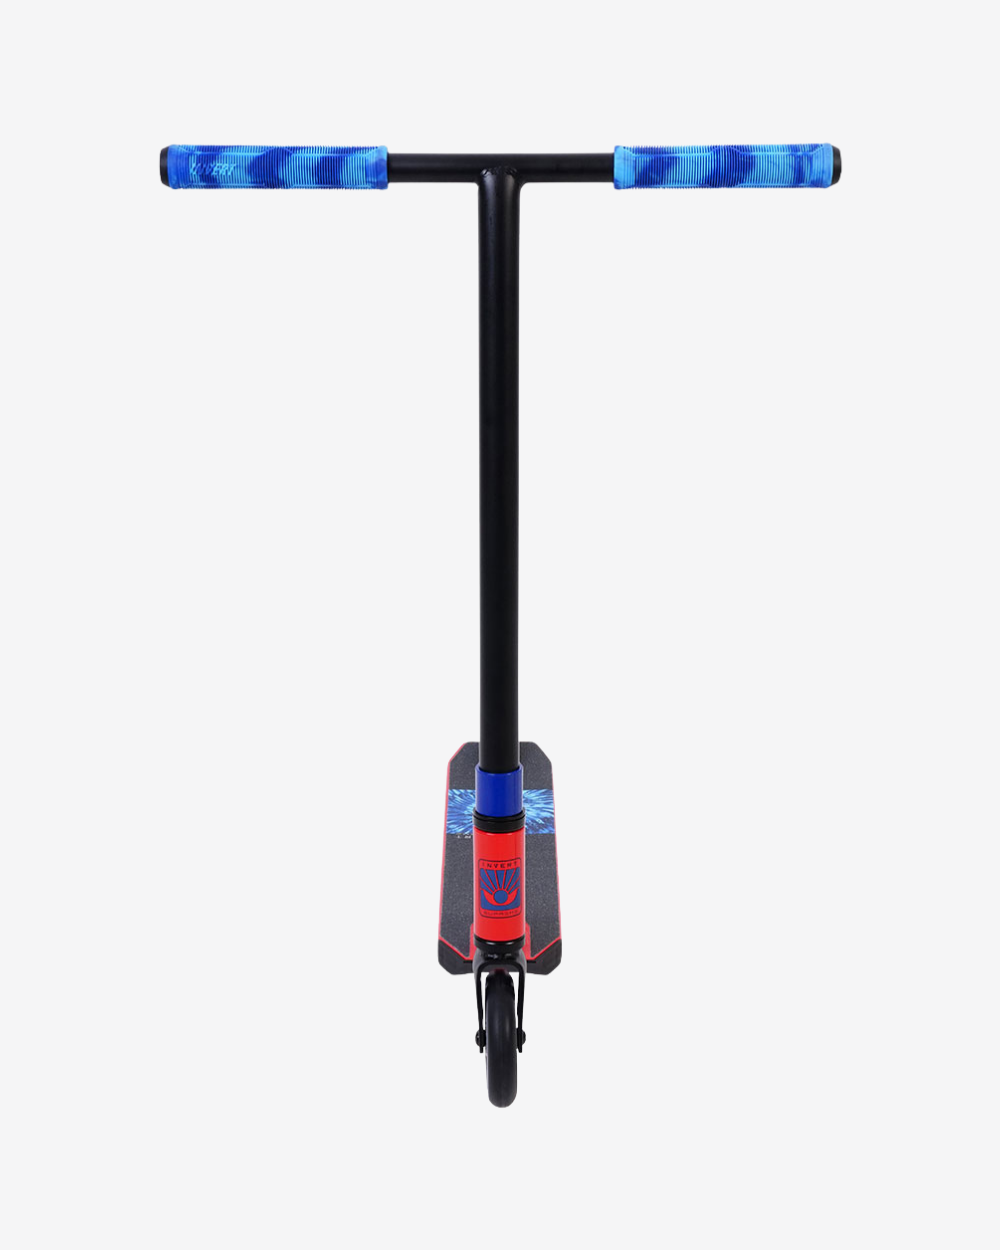 Invert Supreme | Level 1 Complete Scooter | Red/White/Blue